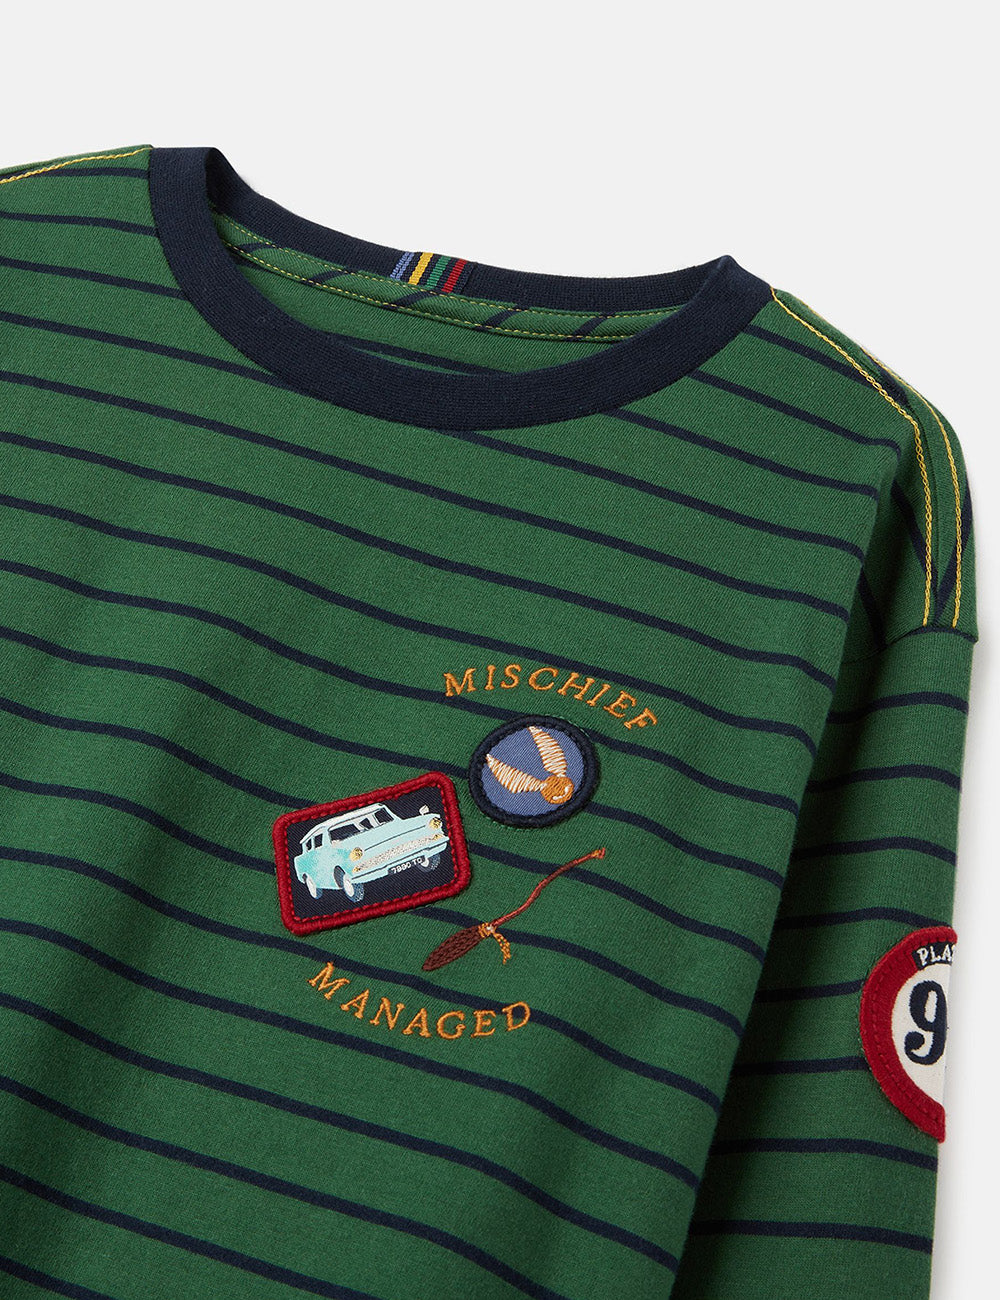 Joules Harry Potter™ Mischief Managed T-Shirt - Green/Navy Stripe